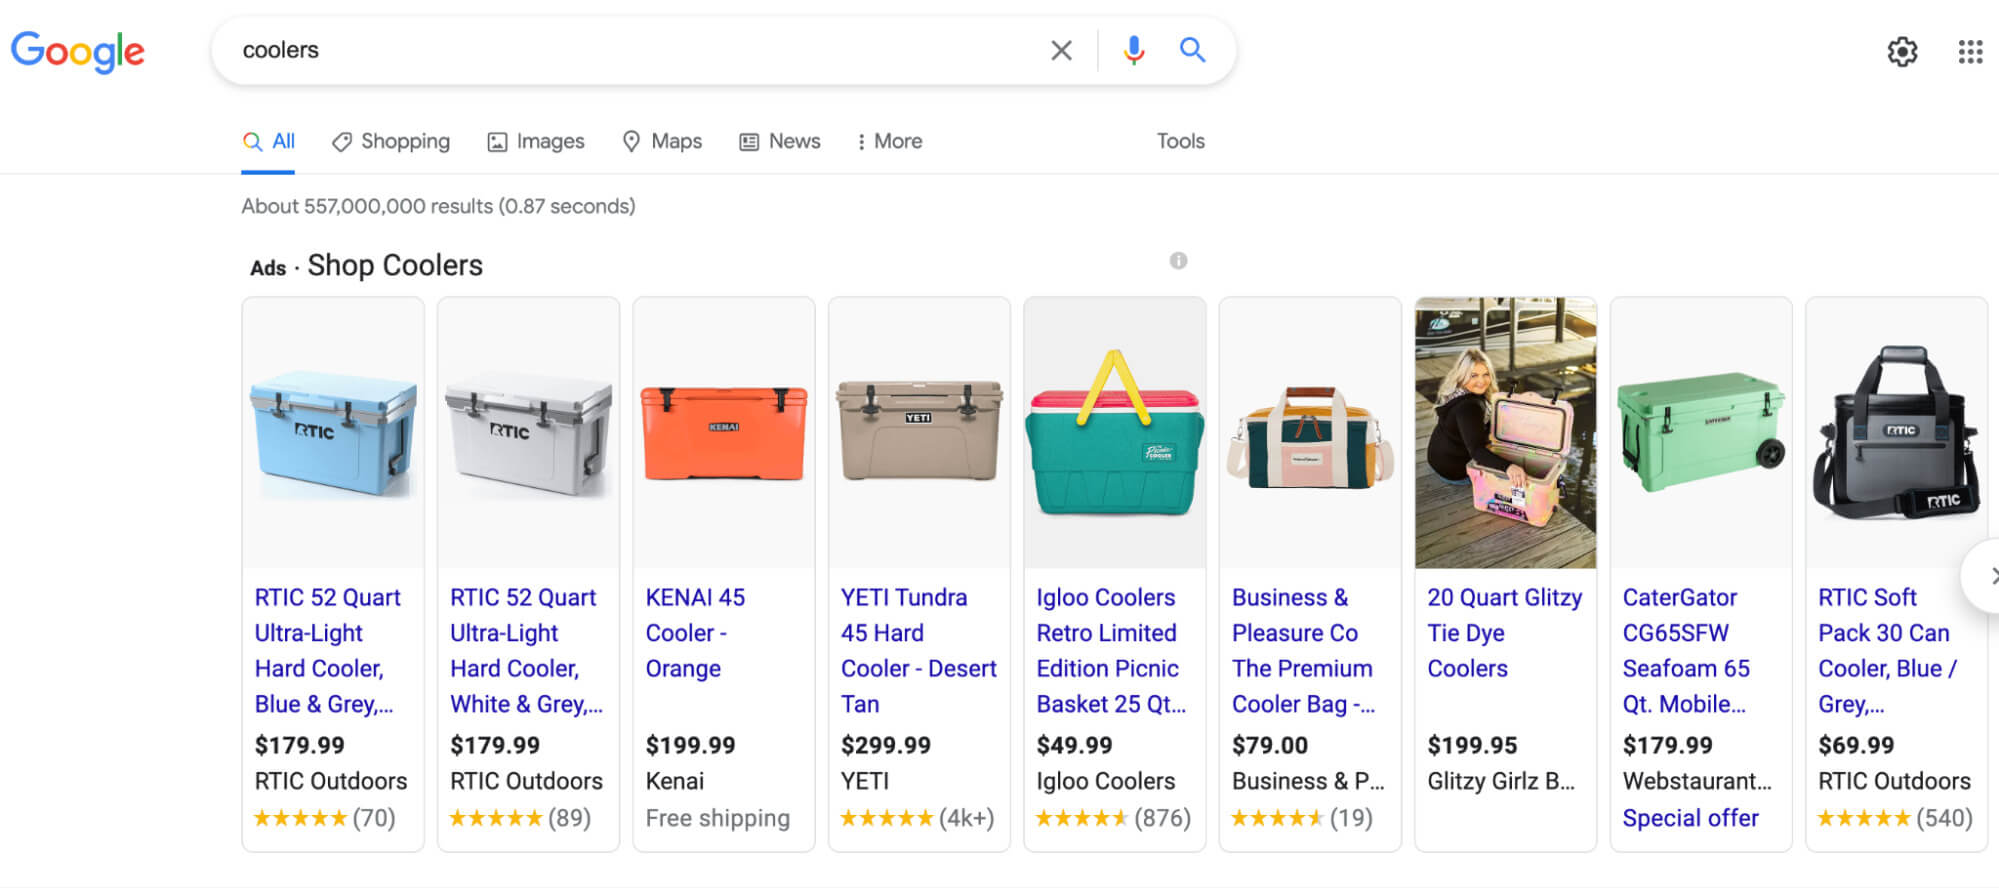 Google Shopping result for coolers